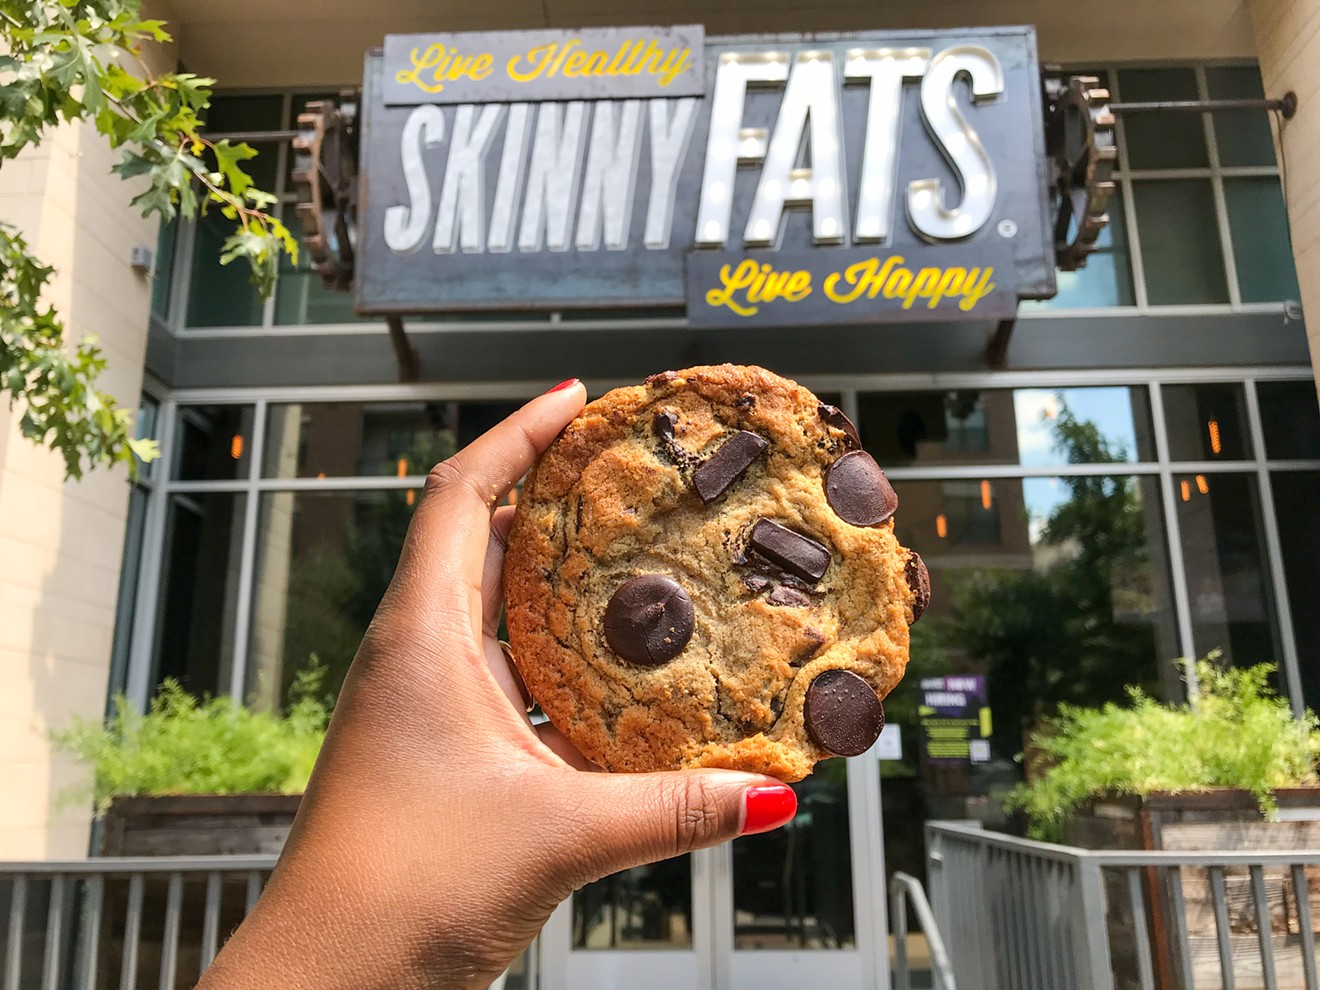 Whether you're going healthy or not, might as well end your meal at SkinnyFats with a cookie.